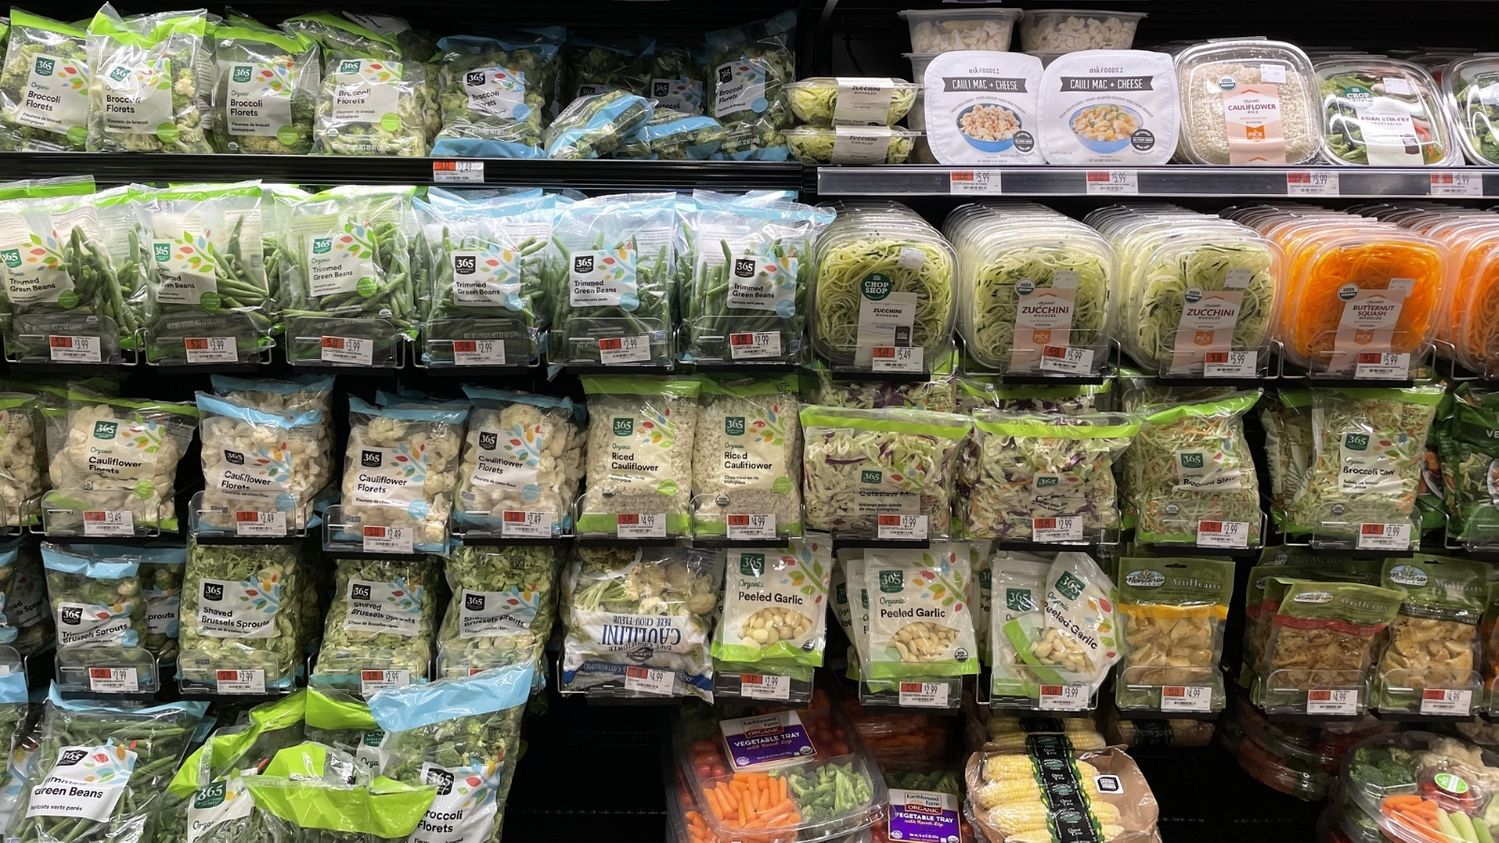 Tell Whole Foods: Stop using wasteful plastic packaging